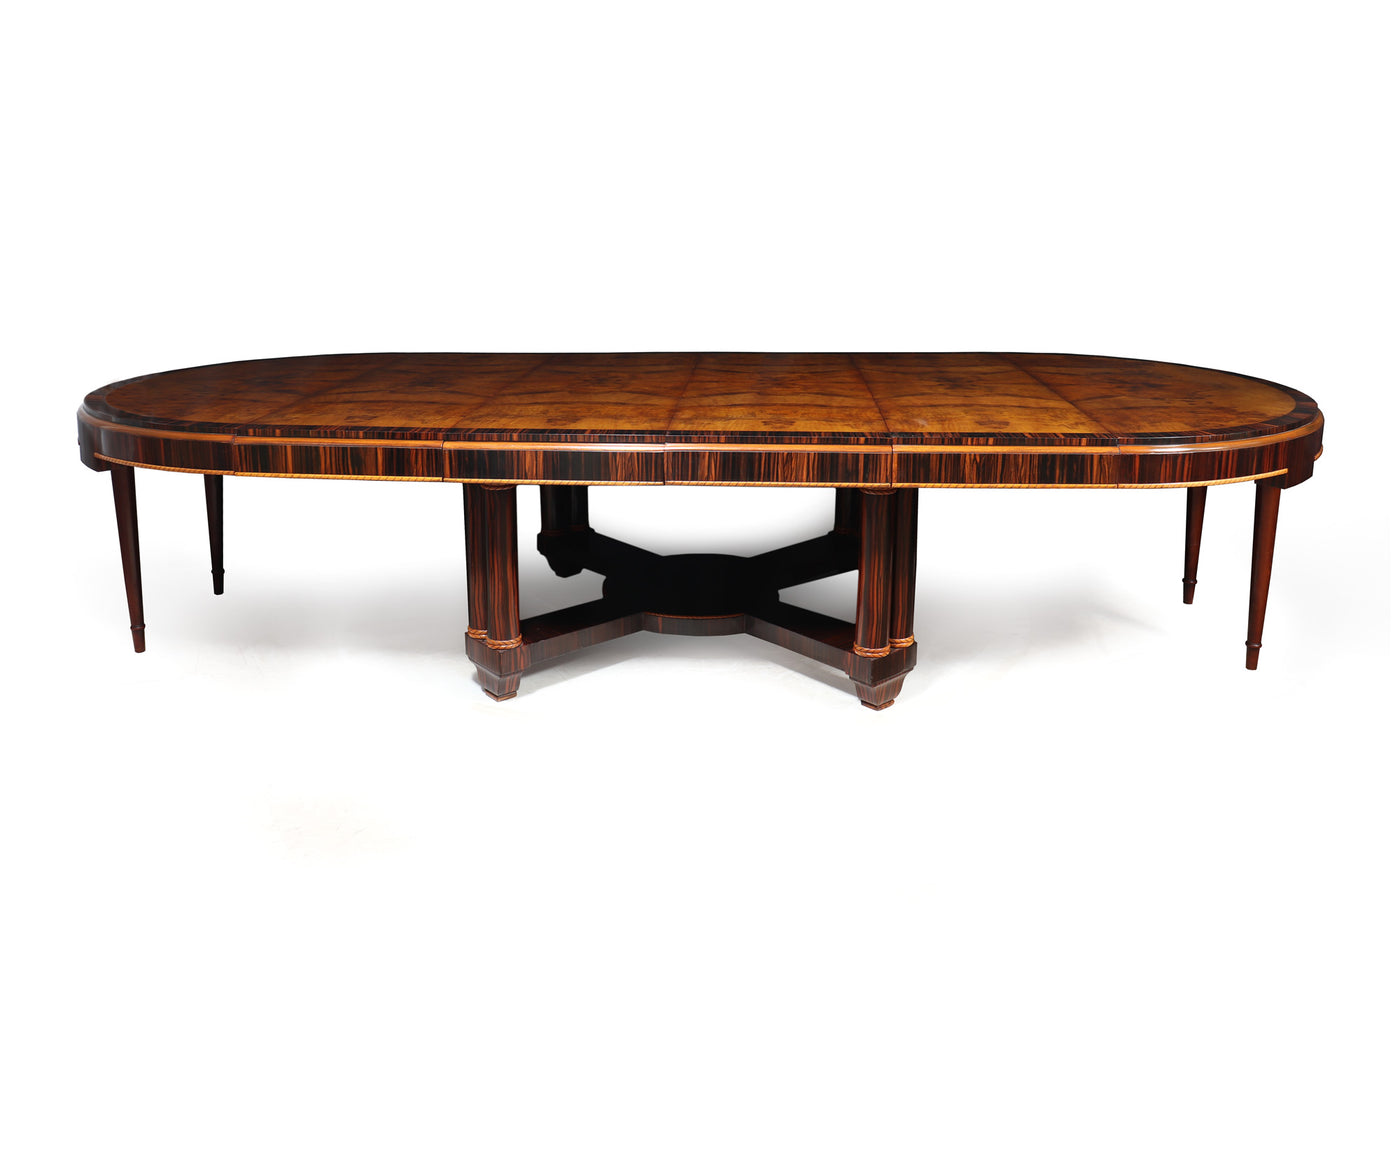 Large 14 Seat Art Deco Dining Table in Walnut and Macassar front